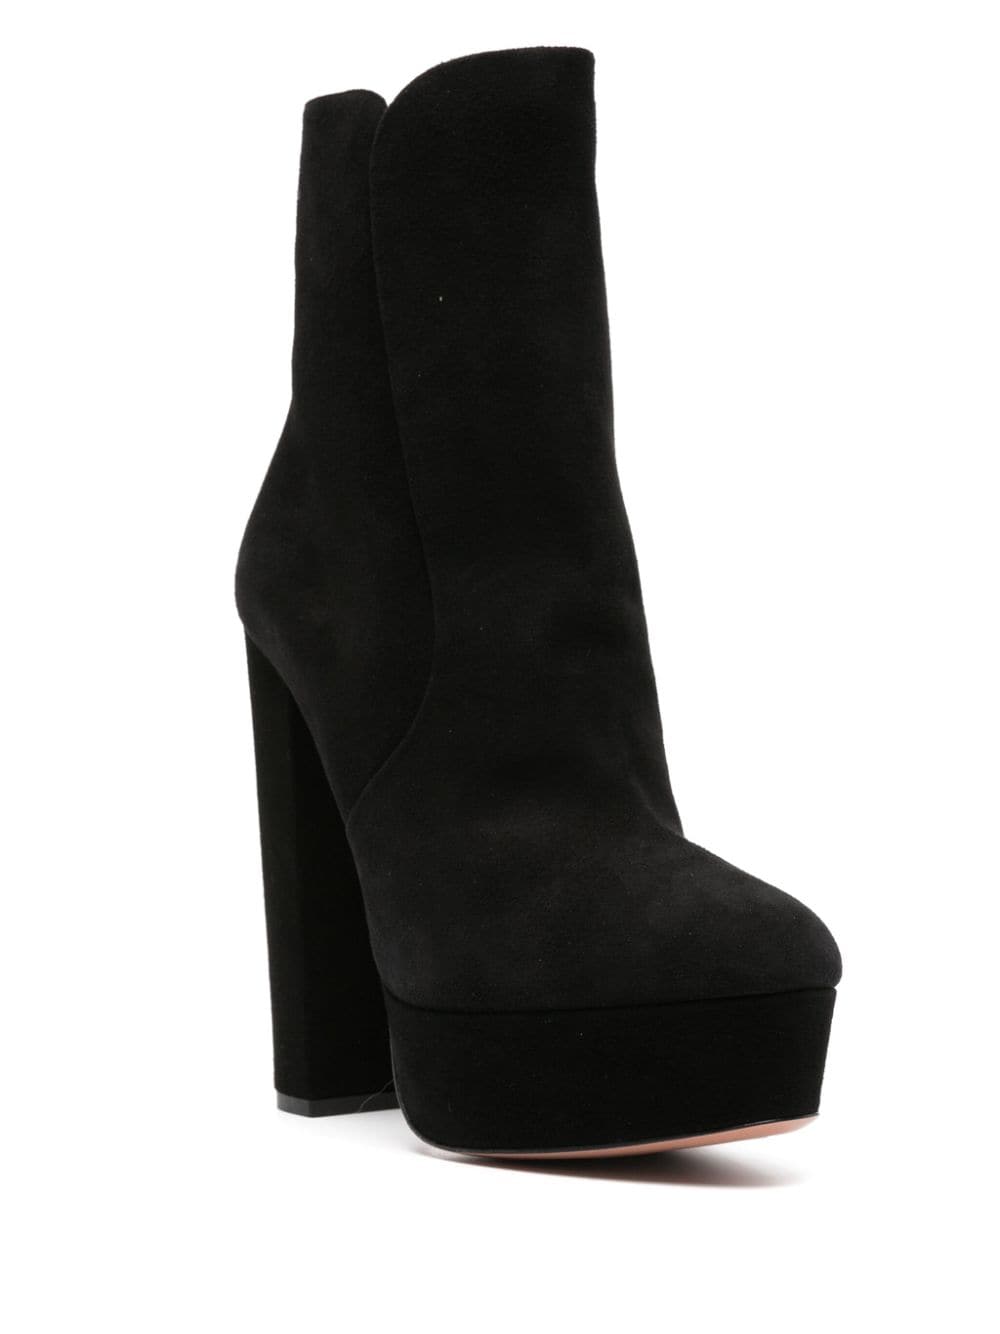 SUE 140MM SUEDE ANKLE BOOTS